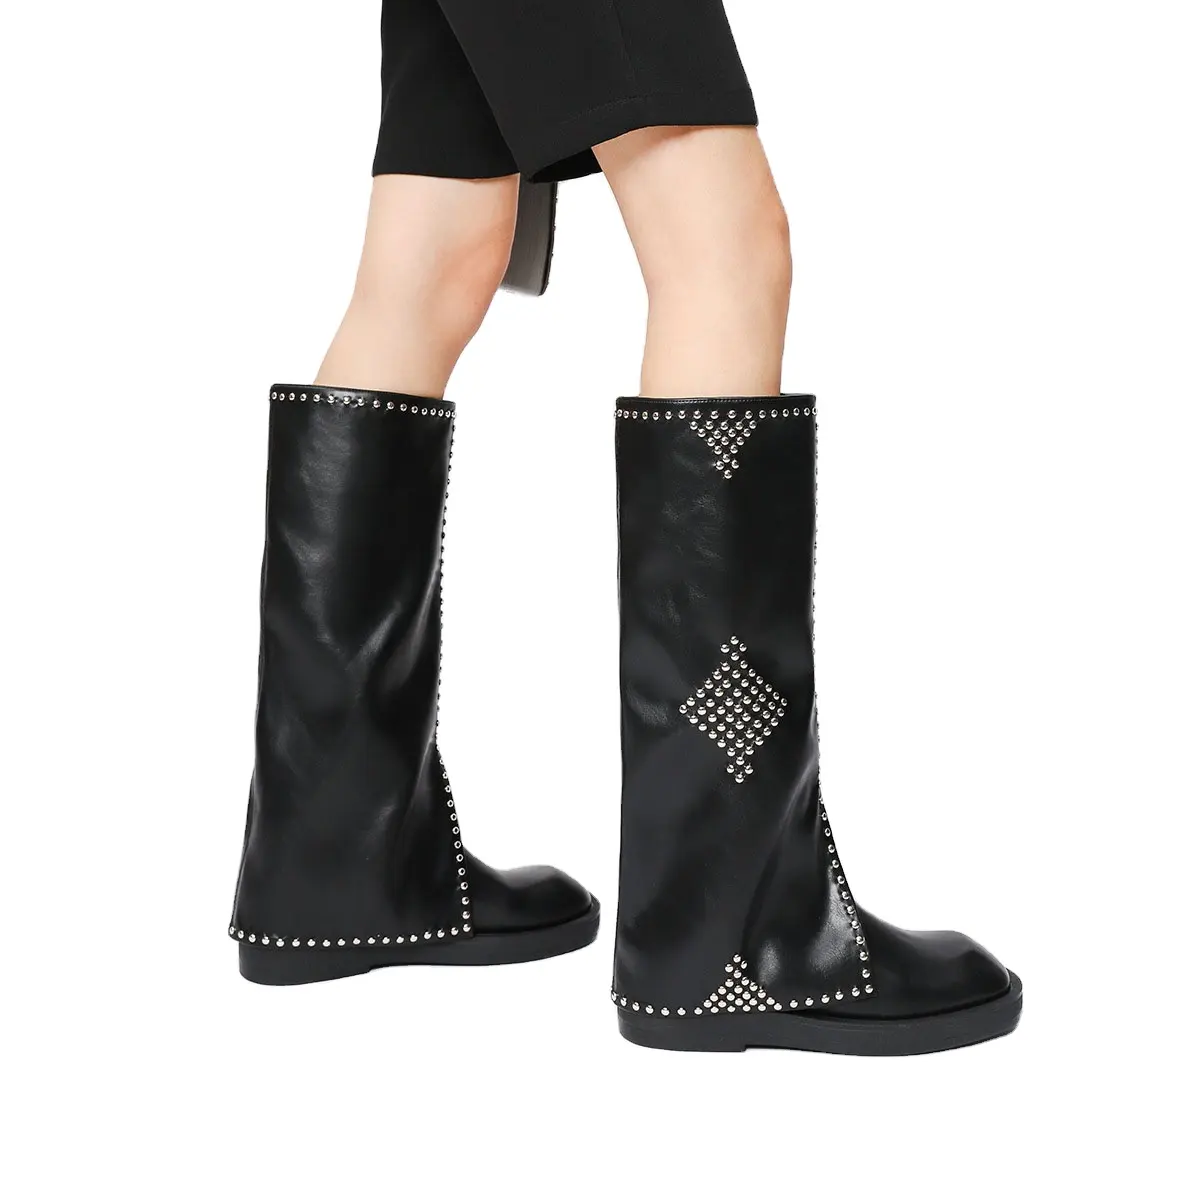 Knight boots women 2021 autumn and winter new rivet boots but knee boots